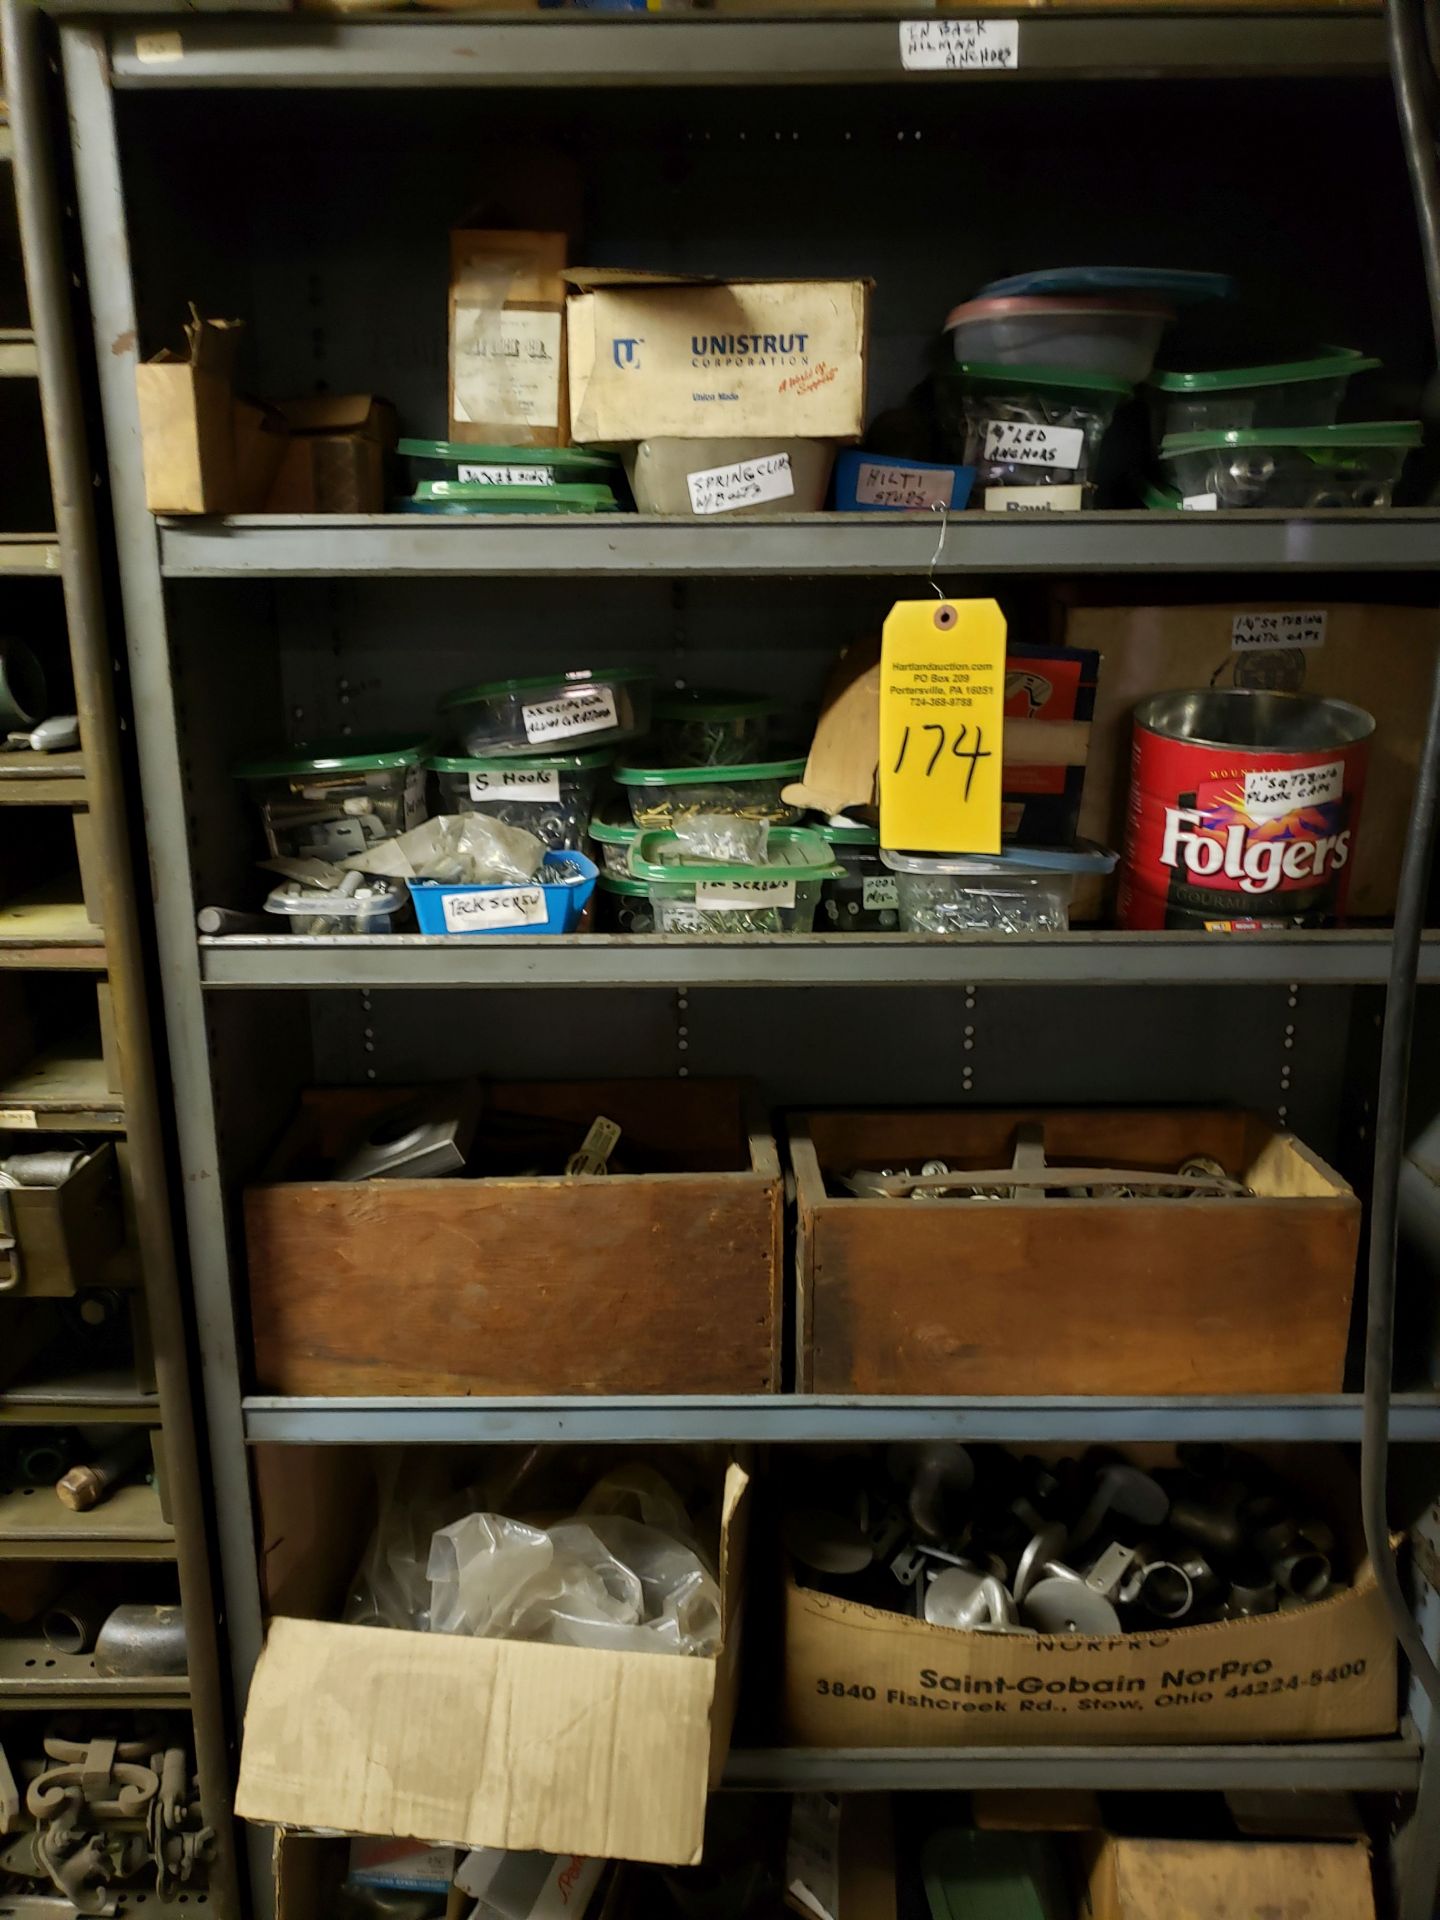 BALANCE OF CONTENTS OF MAINTENANCE ROOM 9 SHELVES & CONTENTS - FASTENERS, ELECTRICAL, FITTINGS,